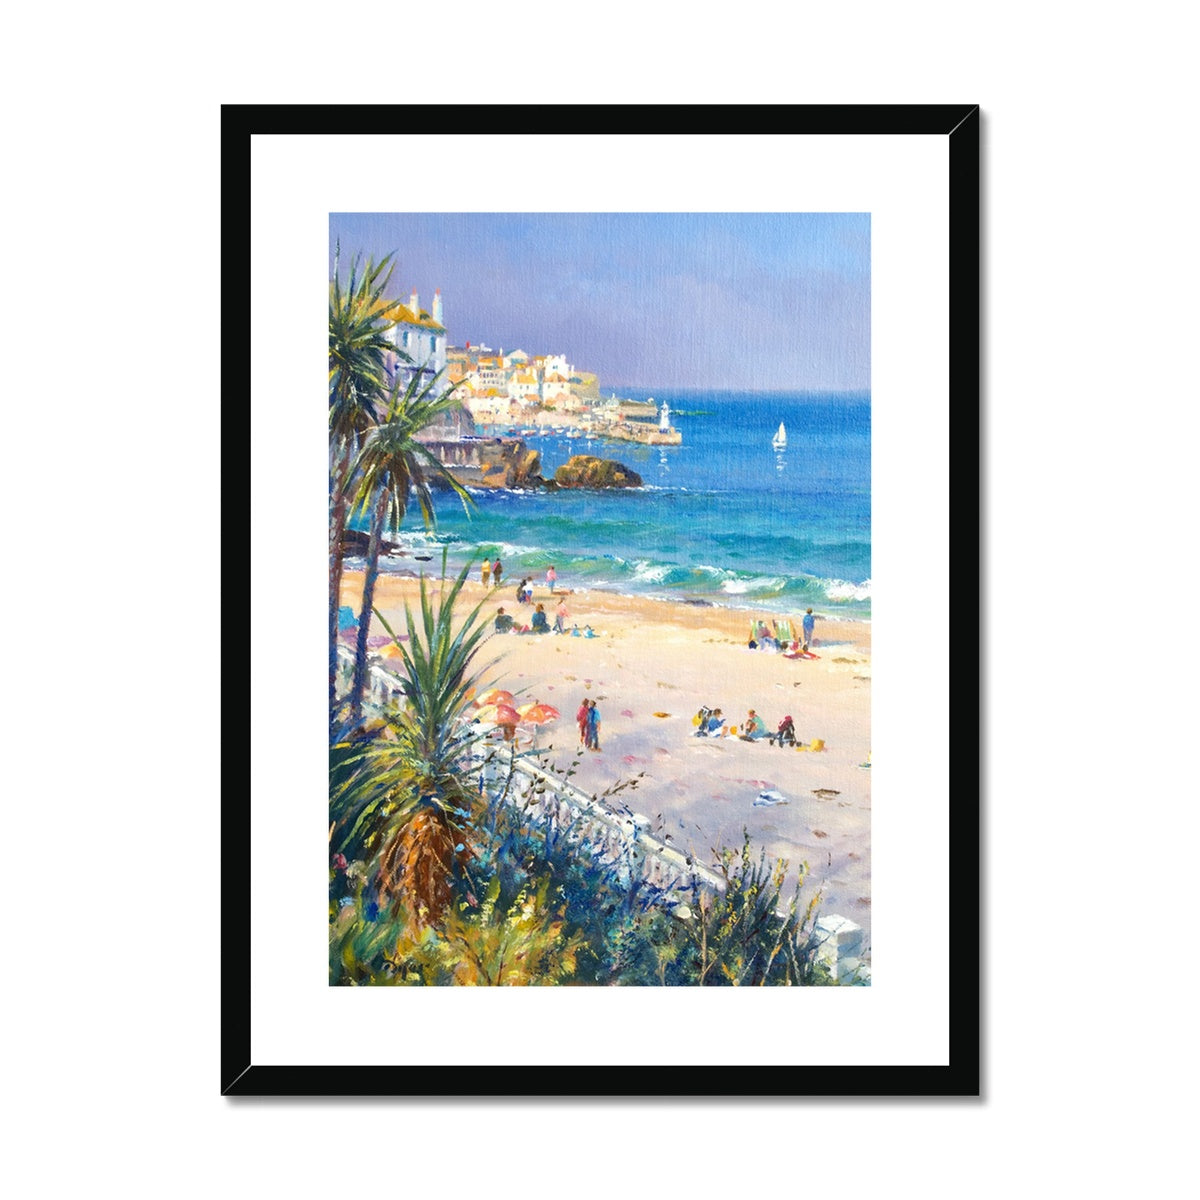  Ted Dyer Framed Open Edition Cornish Fine Art Print. 'Afternoon on the Beach. St Ives'. Cornwall Art Gallery